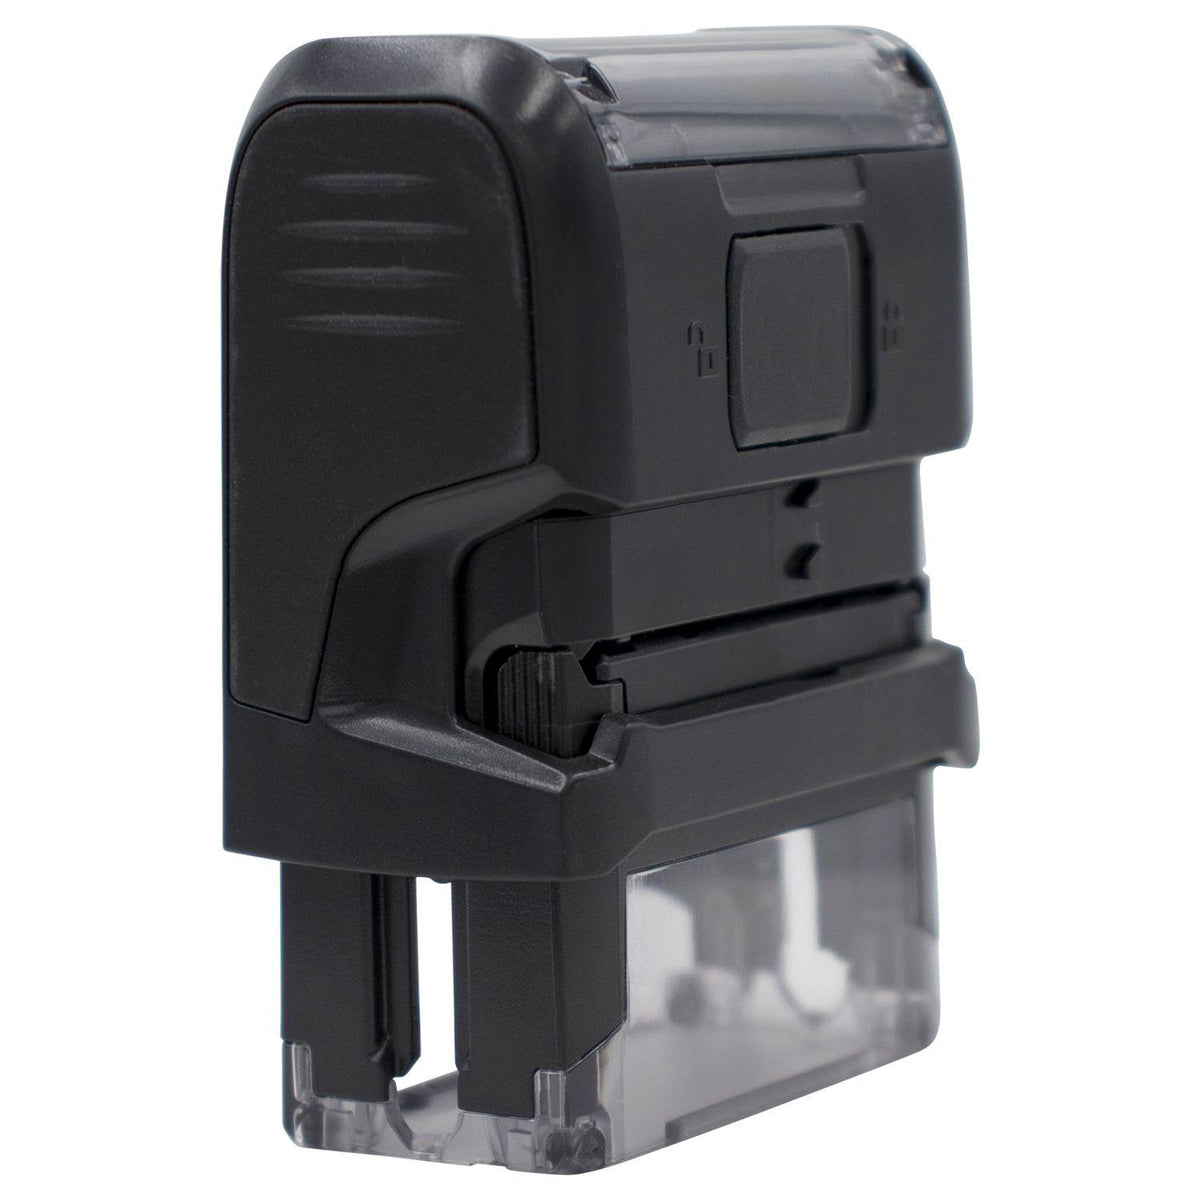 Self Inking Fax It 2 Stamp - Engineer Seal Stamps - Brand_Trodat, Impression Size_Large, Stamp Type_Self-Inking Stamp, Type of Use_Office